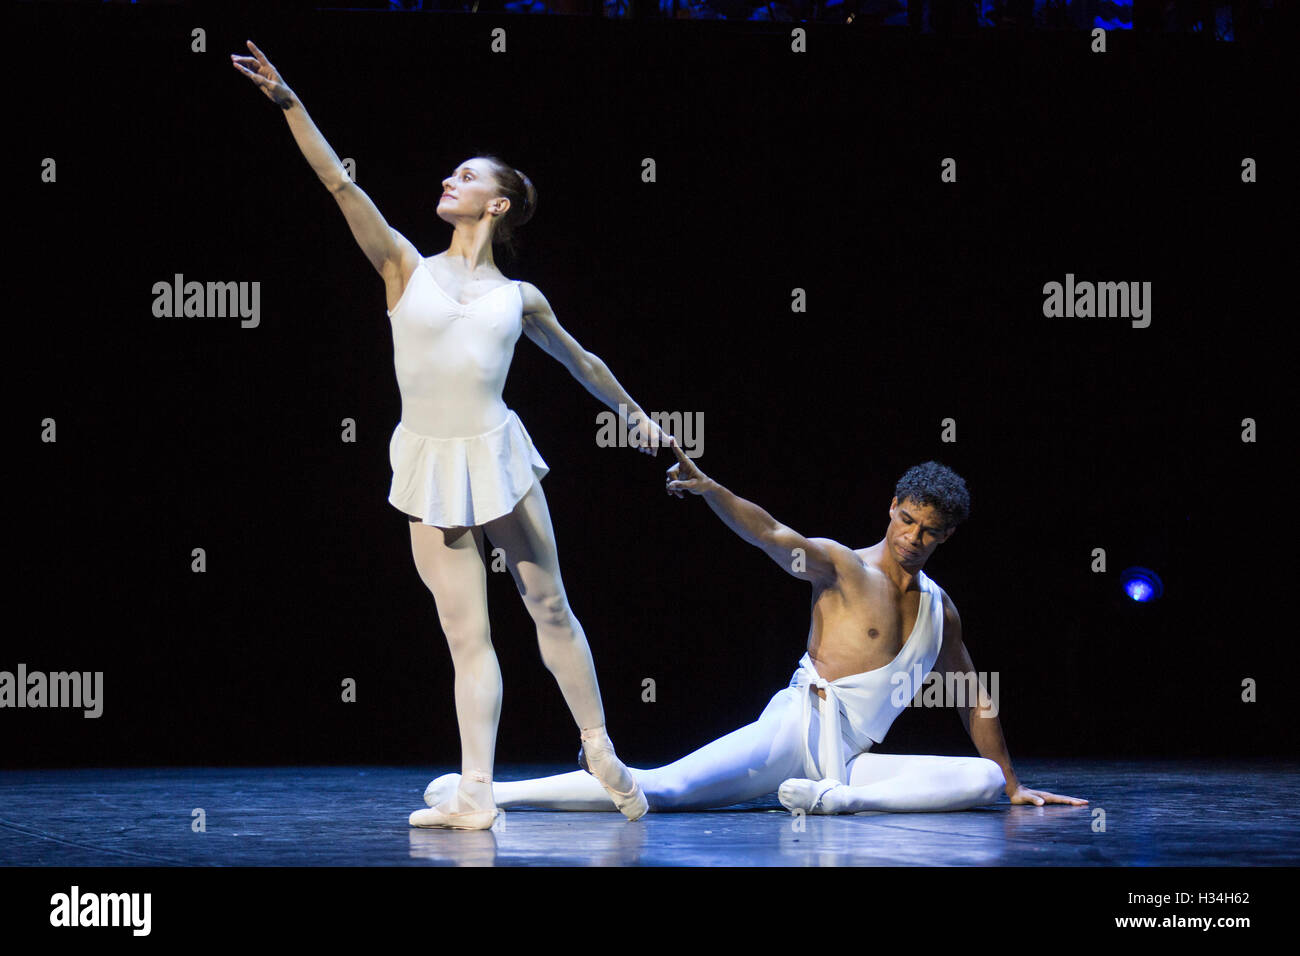 London, UK. 3 October 2016. Carlos Acosta performs the classical Pas de Deux from Stravinsky's Apollo with Marianela Nunez. Choreography by George Balanchine. Carlos Acosta bids farewell to classical ballet with his final performances at the Royal Albert Hall for a limited run from 3 to 7 October 2016. The Classical Farewell celebrates highlights from Acosta's career which led him to become the most famous male dancer of his generation, and marks the final time for audiences to watch the ballet superstar dance classical works. Stock Photo